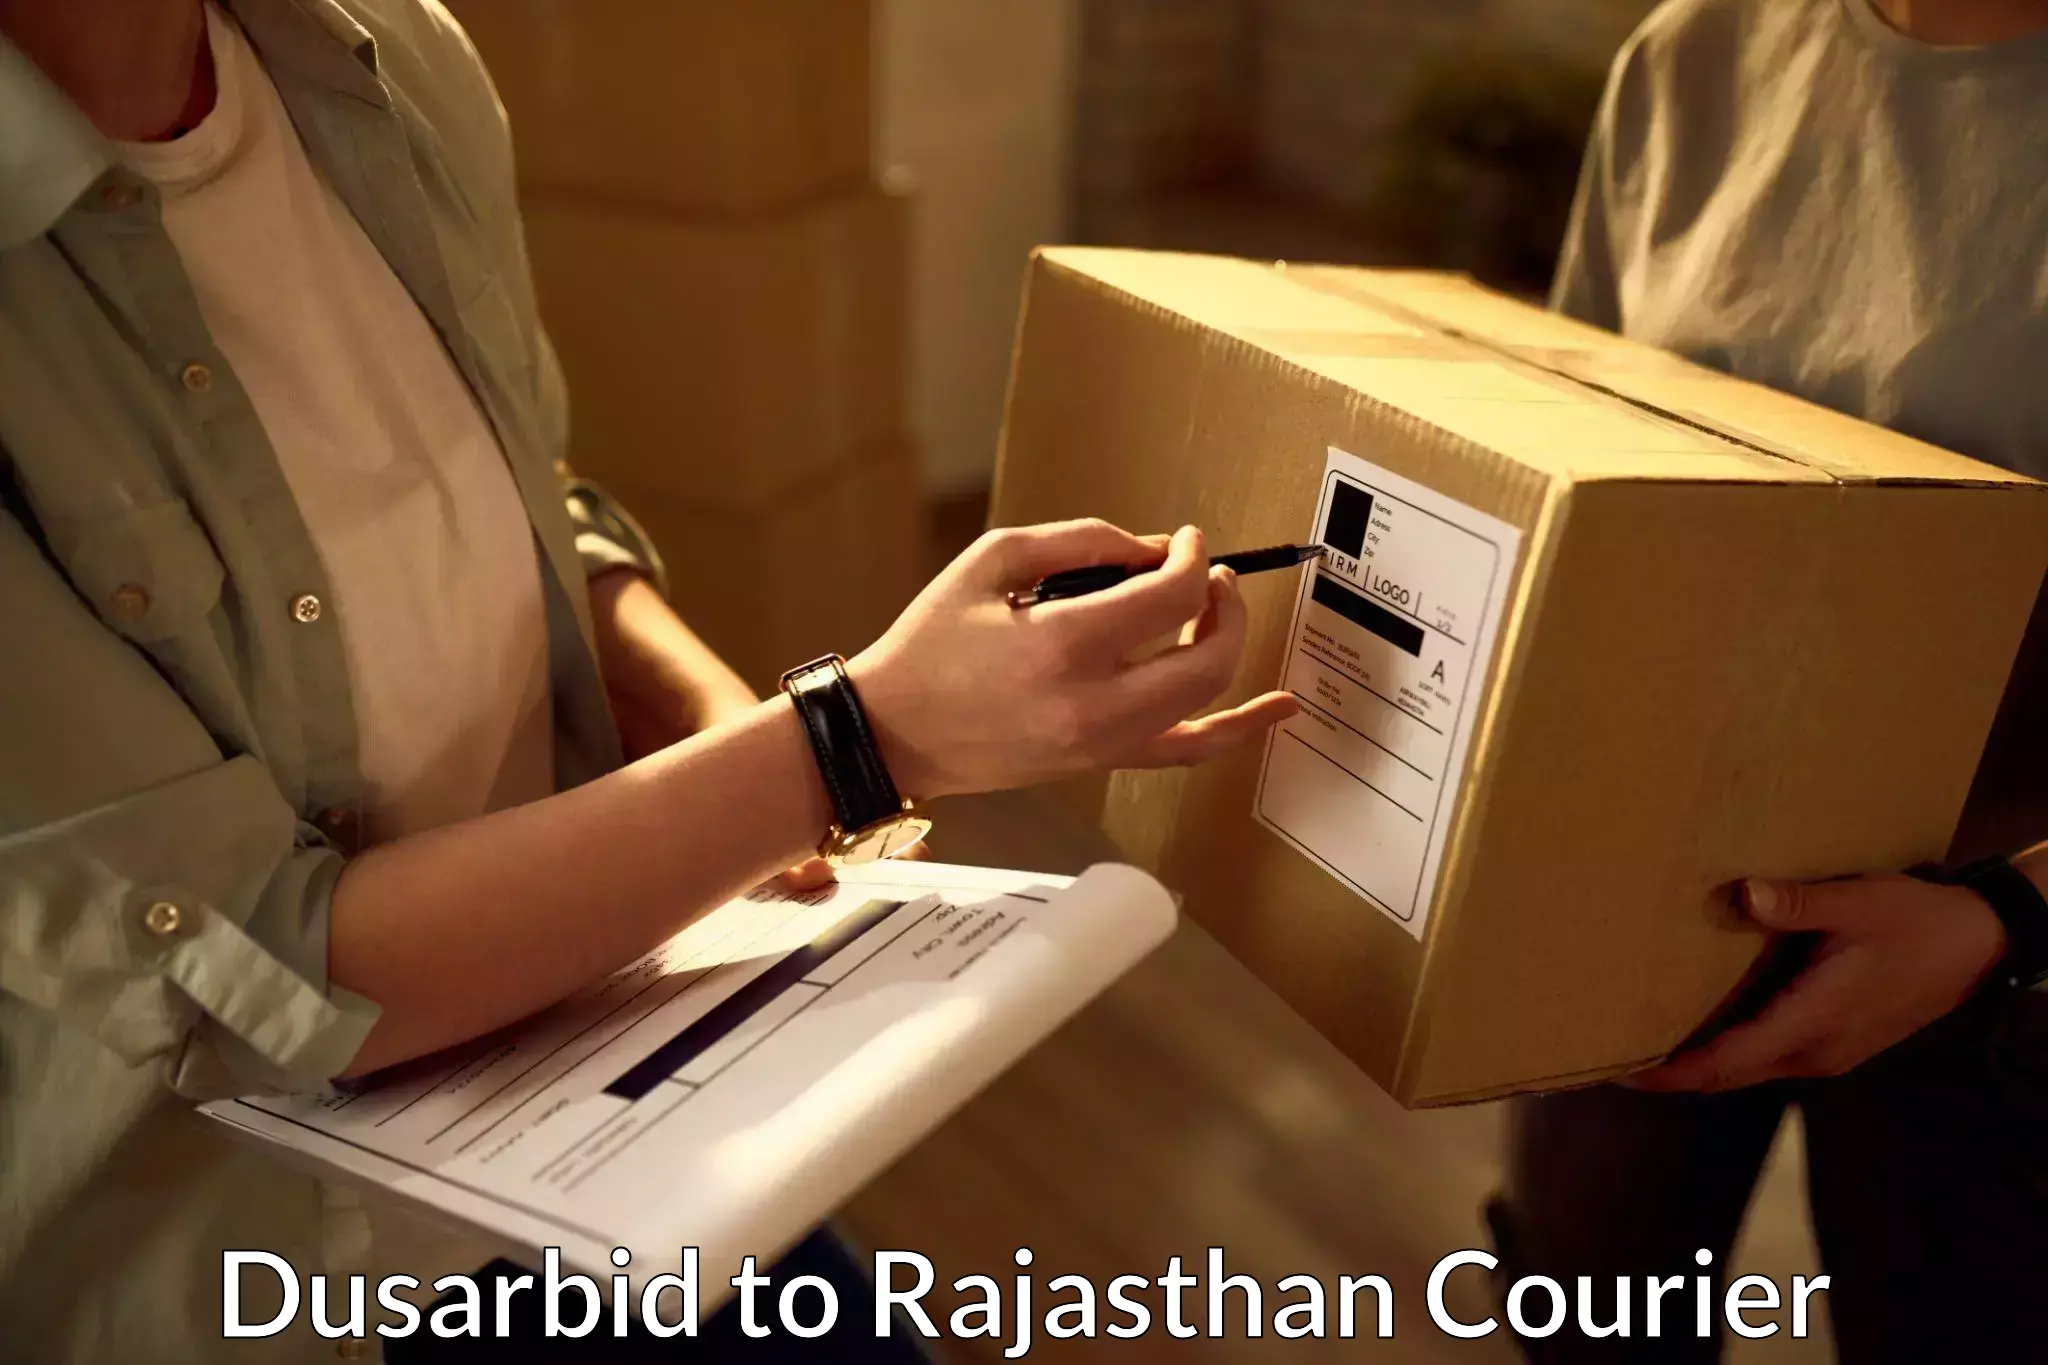 Bulk courier orders Dusarbid to Rajasthan